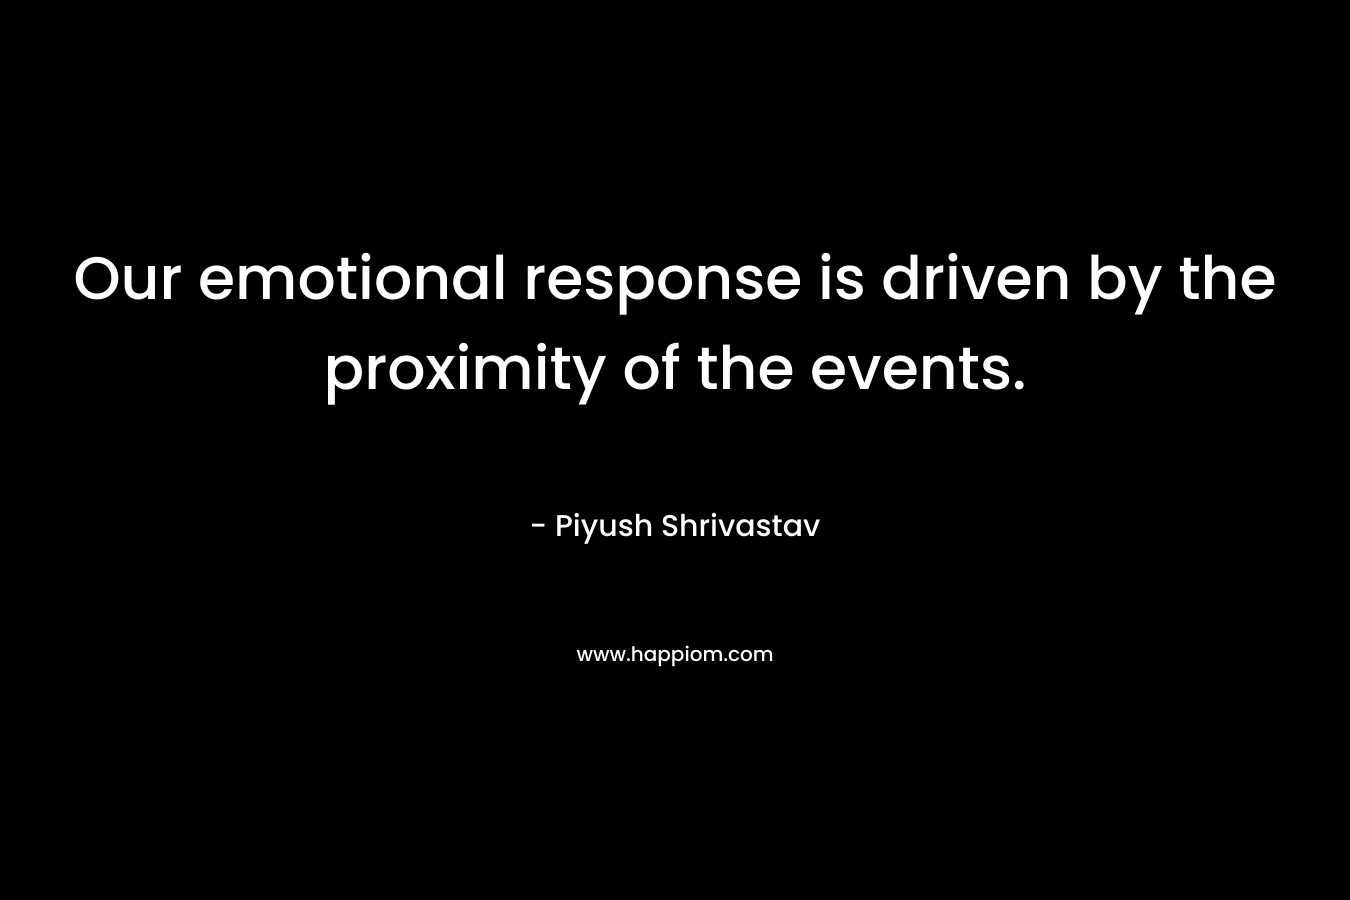 Our emotional response is driven by the proximity of the events. – Piyush Shrivastav